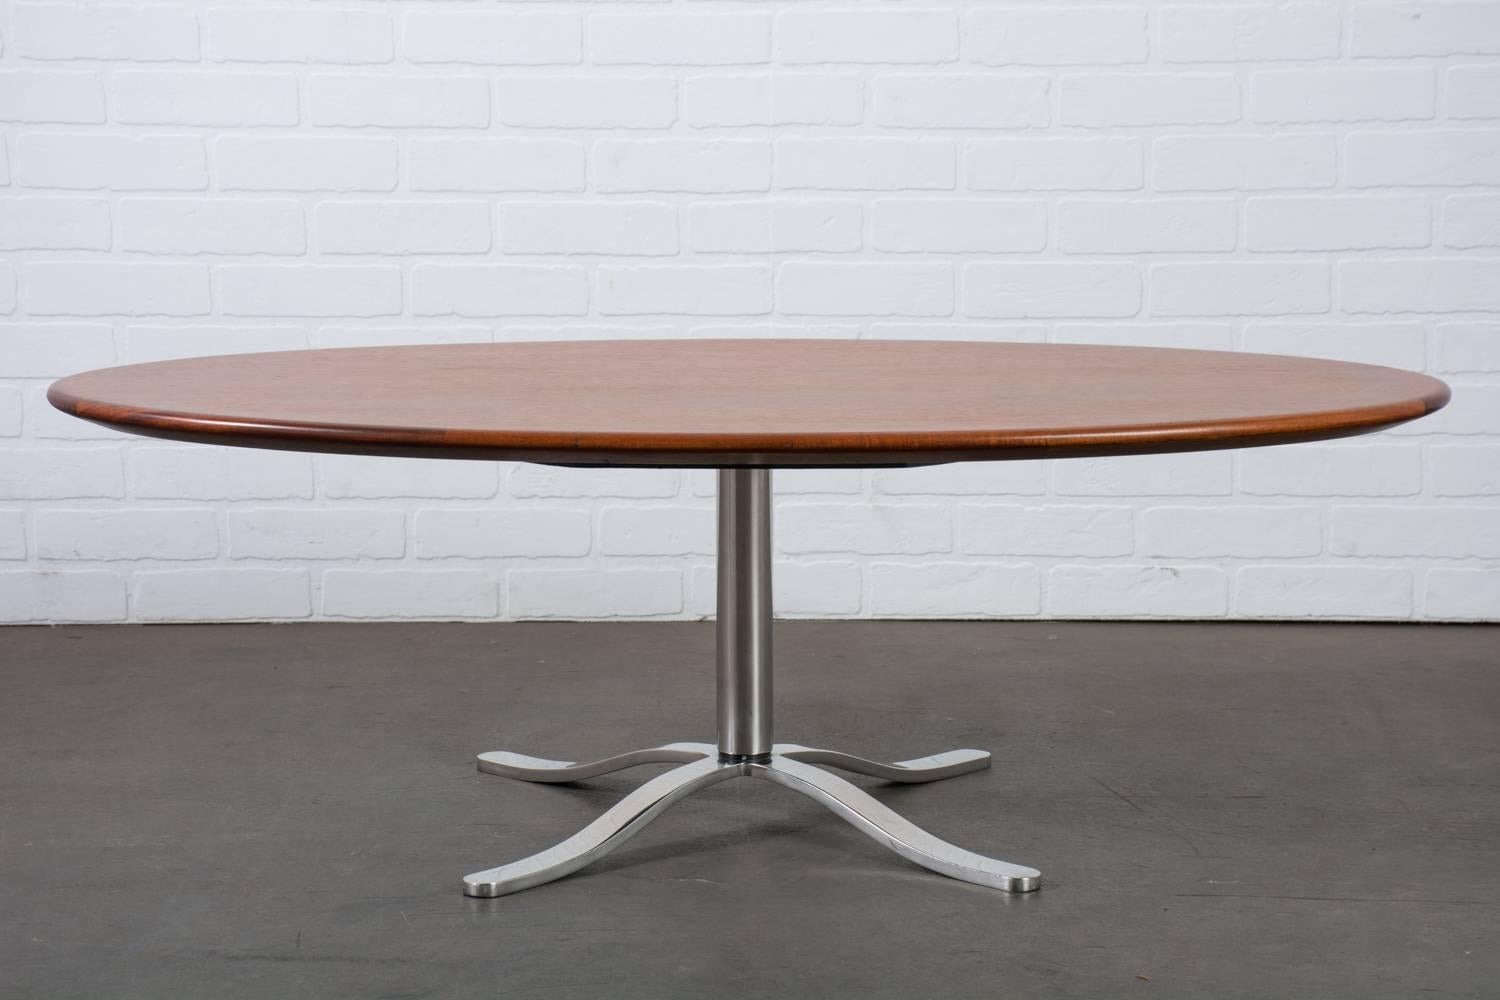 This Mid-Century Modern coffee table by Dunbar features an oval teak top with a bevelled edge and a polished stainless steel 'X' base. Dunbar label underneath.